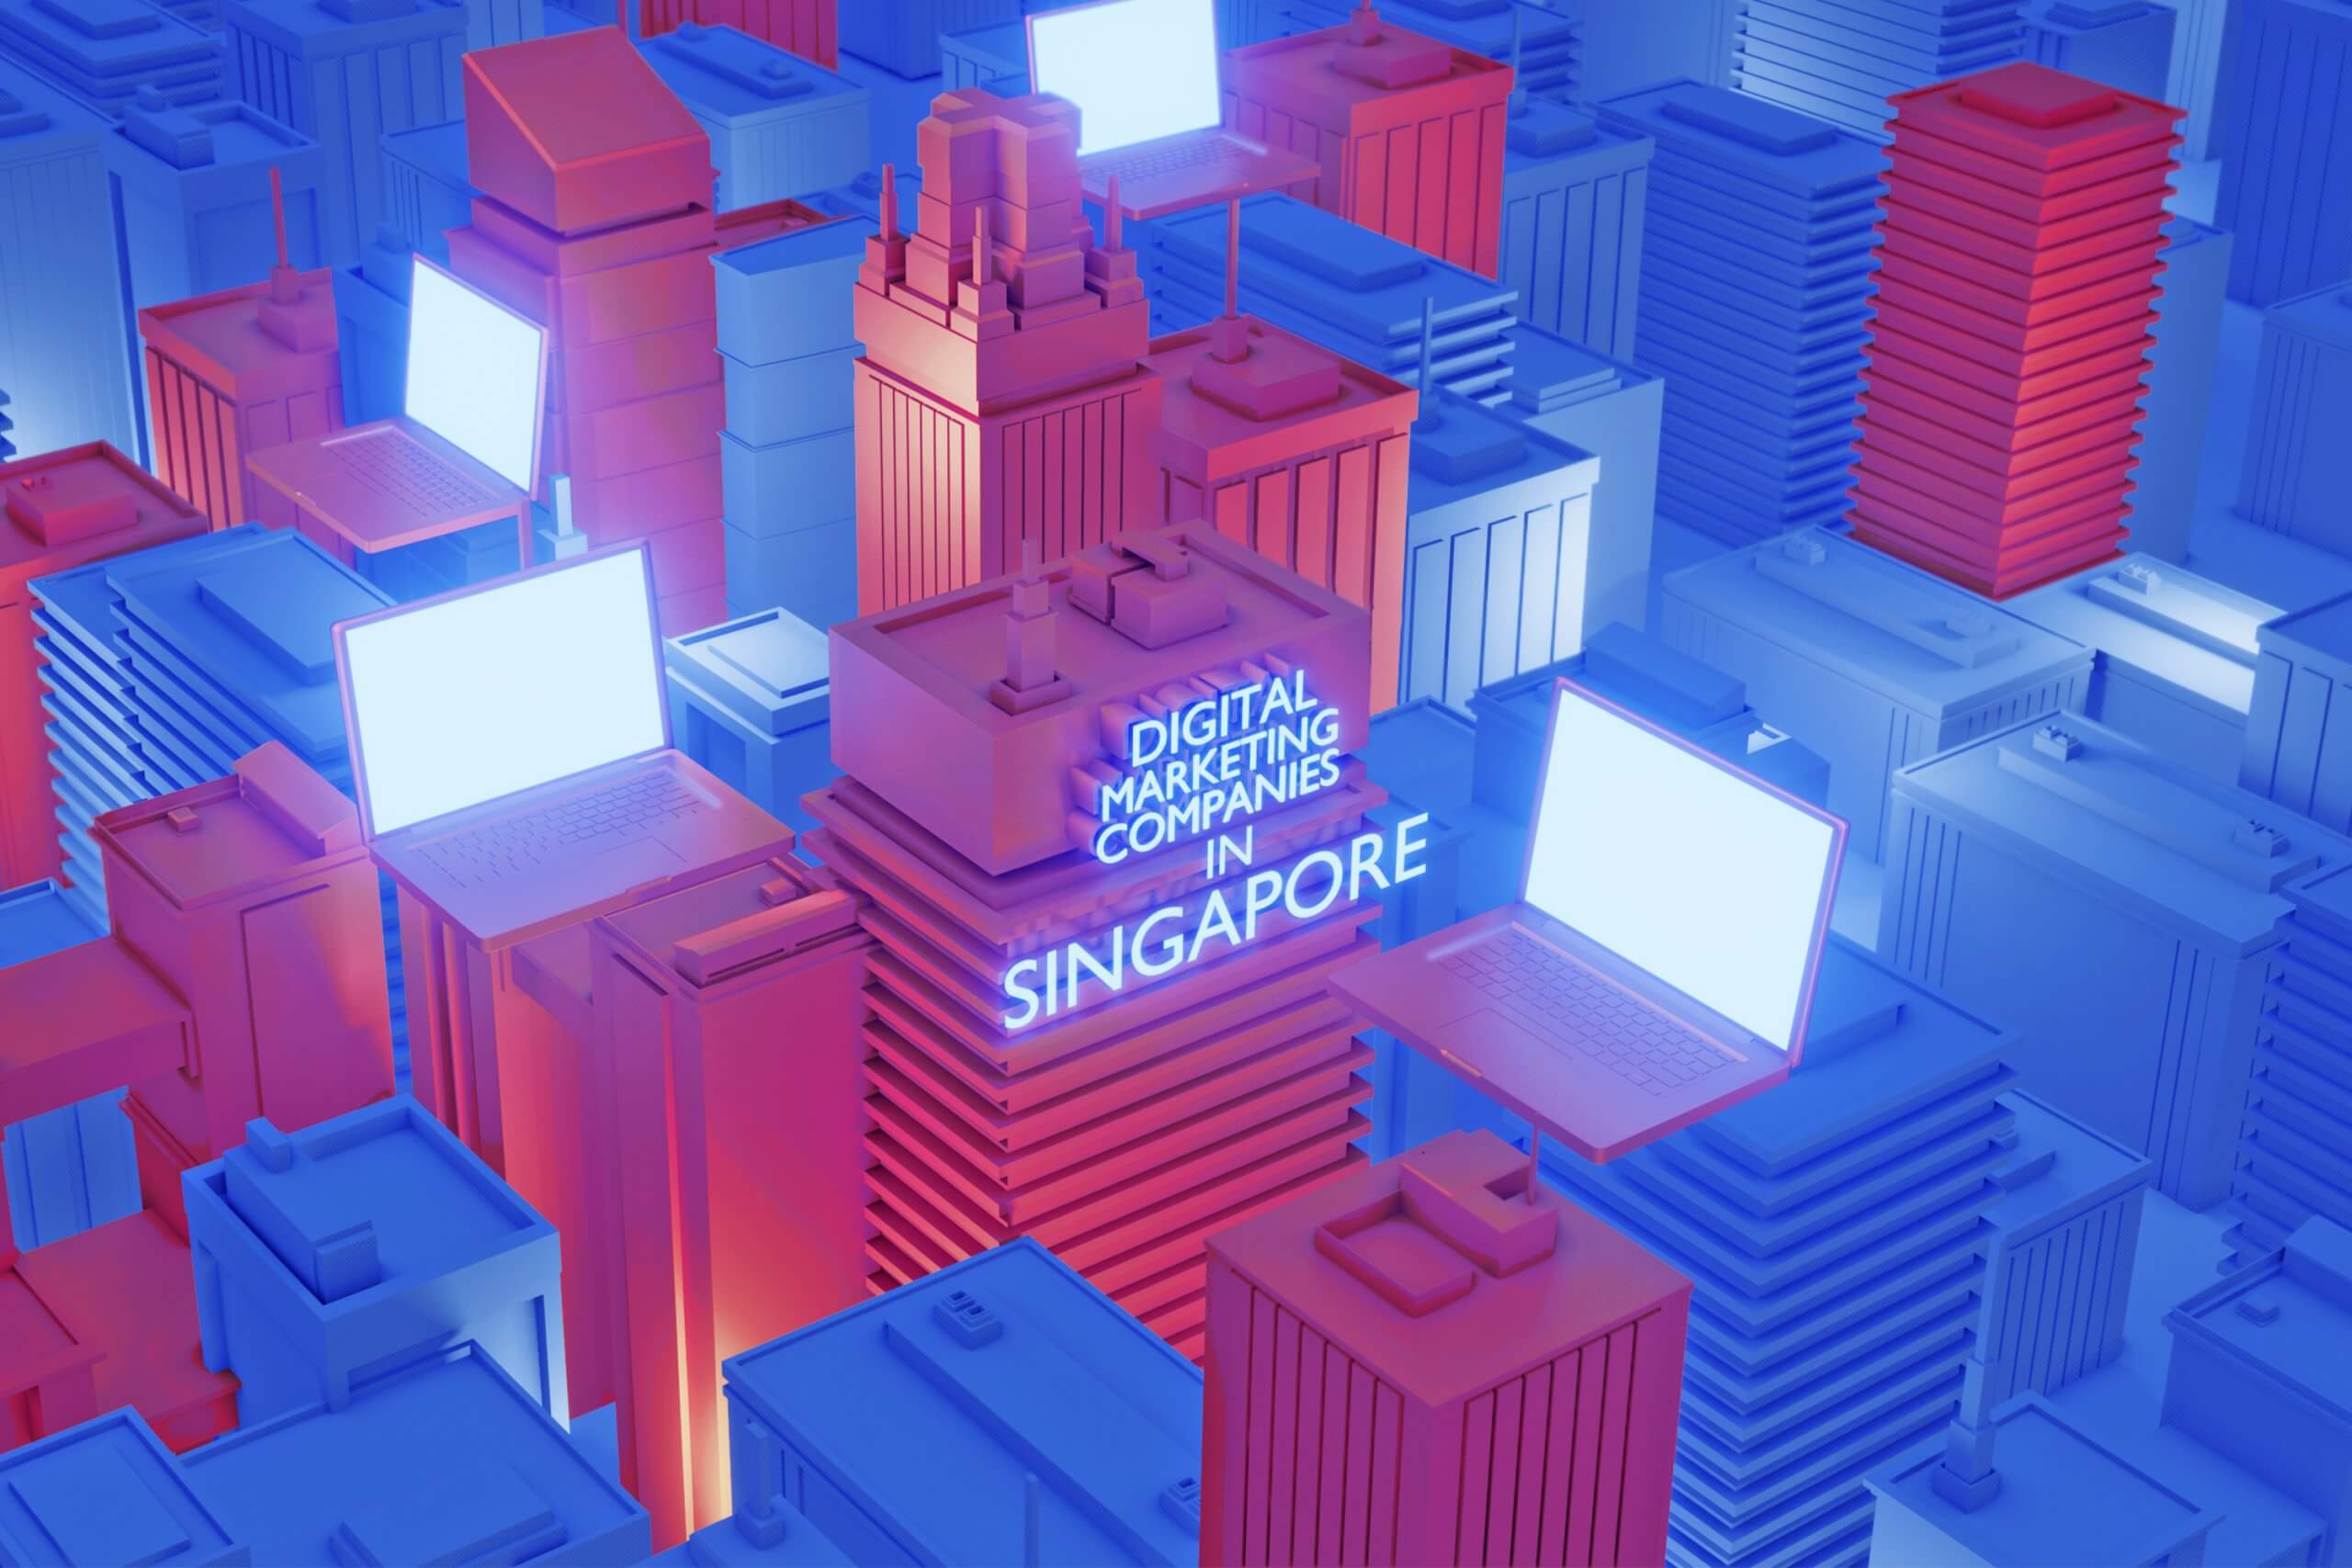 3 Digital Marketing Companies in Singapore that Stand Out